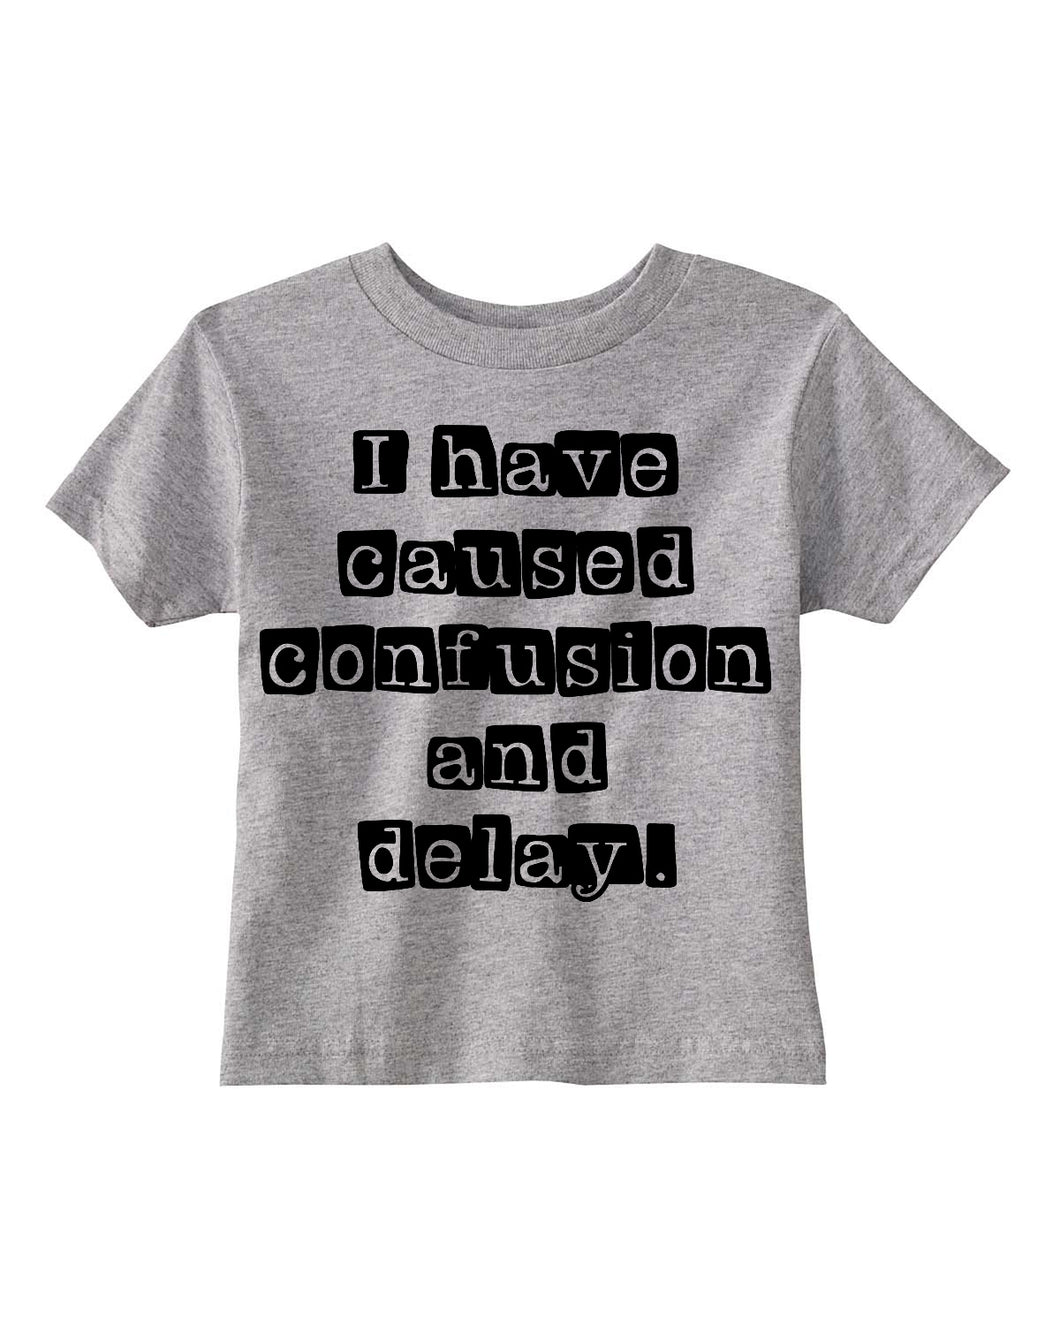 I Have Caused Confusion and Delay Kids Tee